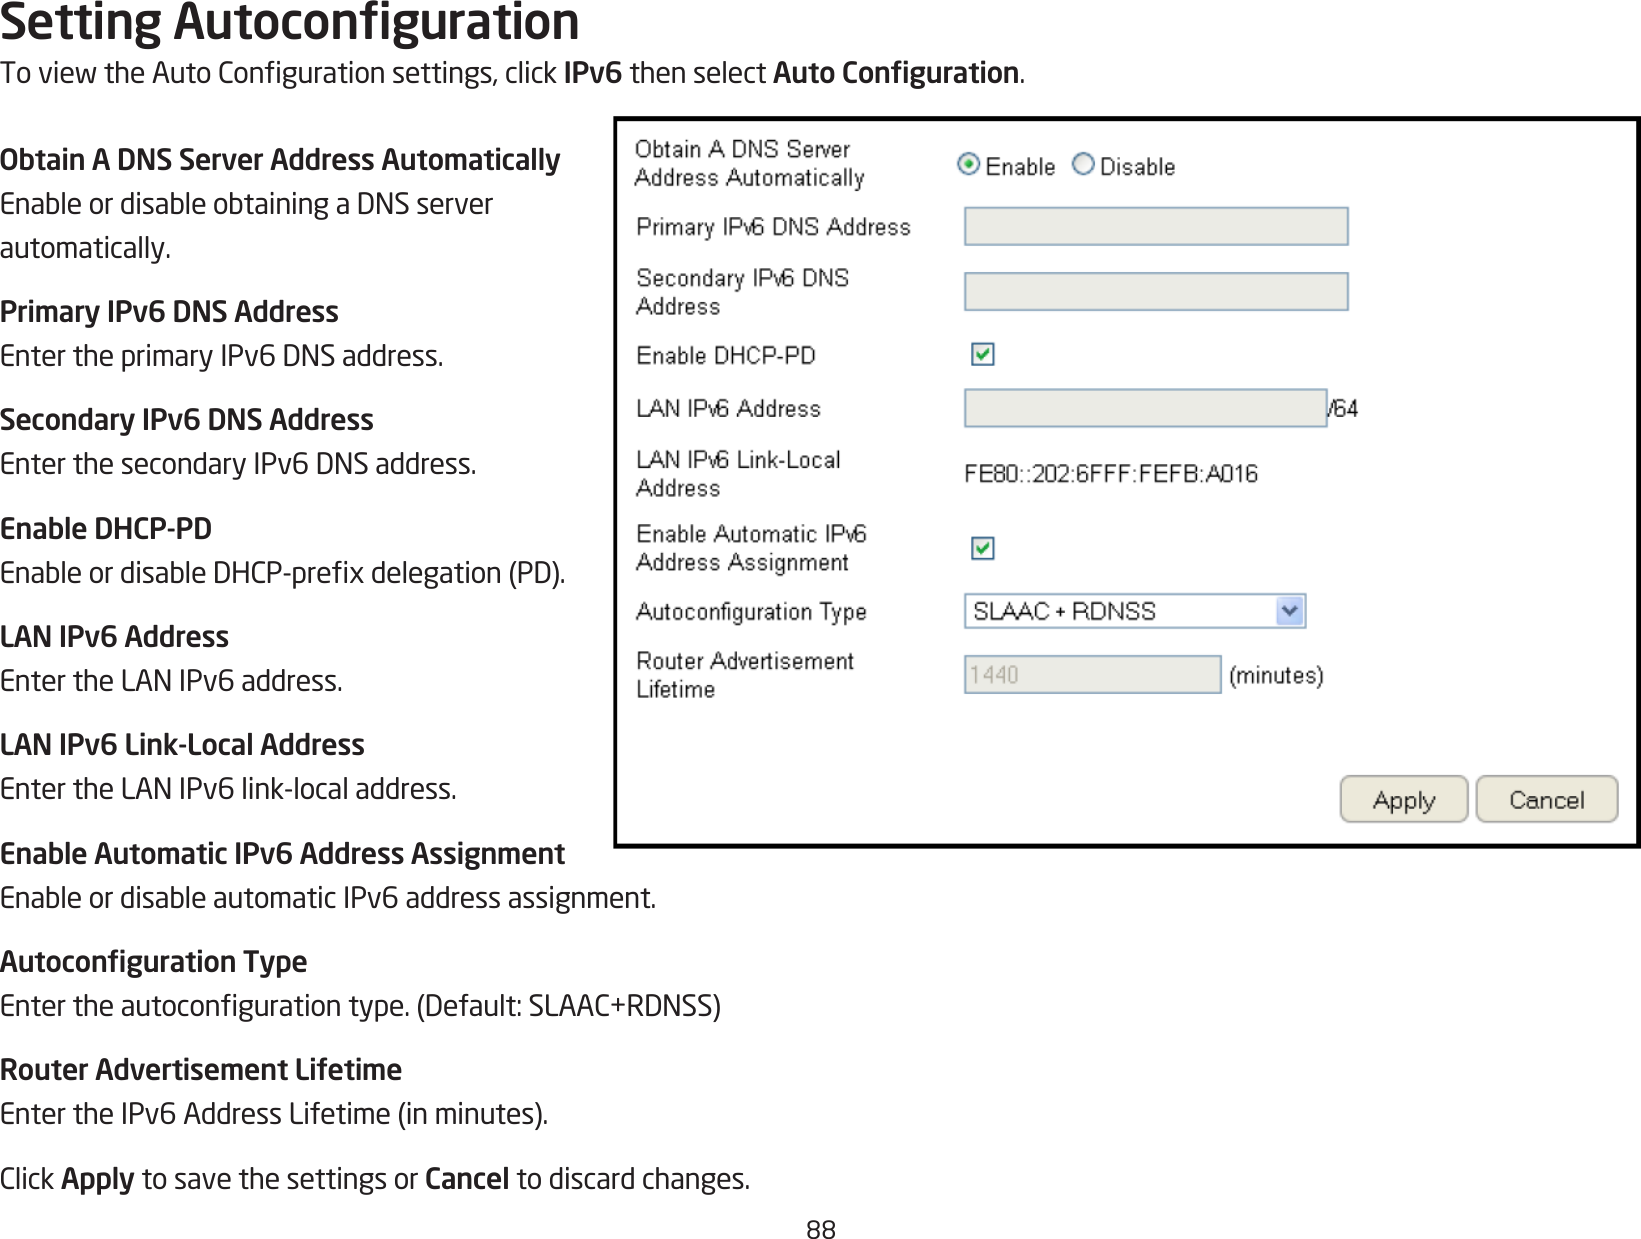 88Setting AutocongurationToviewtheAutoCongurationsettings,clickIPv6 then select Auto Conguration.Obtain A DNS Server Address AutomaticallyEnableordisableobtainingaDNSserverautomatically.Primary IPv6 DNS AddressEntertheprimaryIPv6DNSaddress.Secondary IPv6 DNS AddressEnterthesecondaryIPv6DNSaddress.Enable DHCP-PDEnableordisableDHCP-prexdelegation(PD).LAN IPv6 AddressEntertheLANIPv6address.LAN IPv6 Link-Local AddressEntertheLANIPv6link-localaddress.Enable Automatic IPv6 Address AssignmentEnableordisableautomaticIPv6addressassignment.Autoconguration TypeEntertheautocongurationtype.(Default:SLAAC+RDNSS)Router Advertisement LifetimeEntertheIPv6AddressLifetime(inminutes).ClickApply to save the settings or Cancel to discard changes.